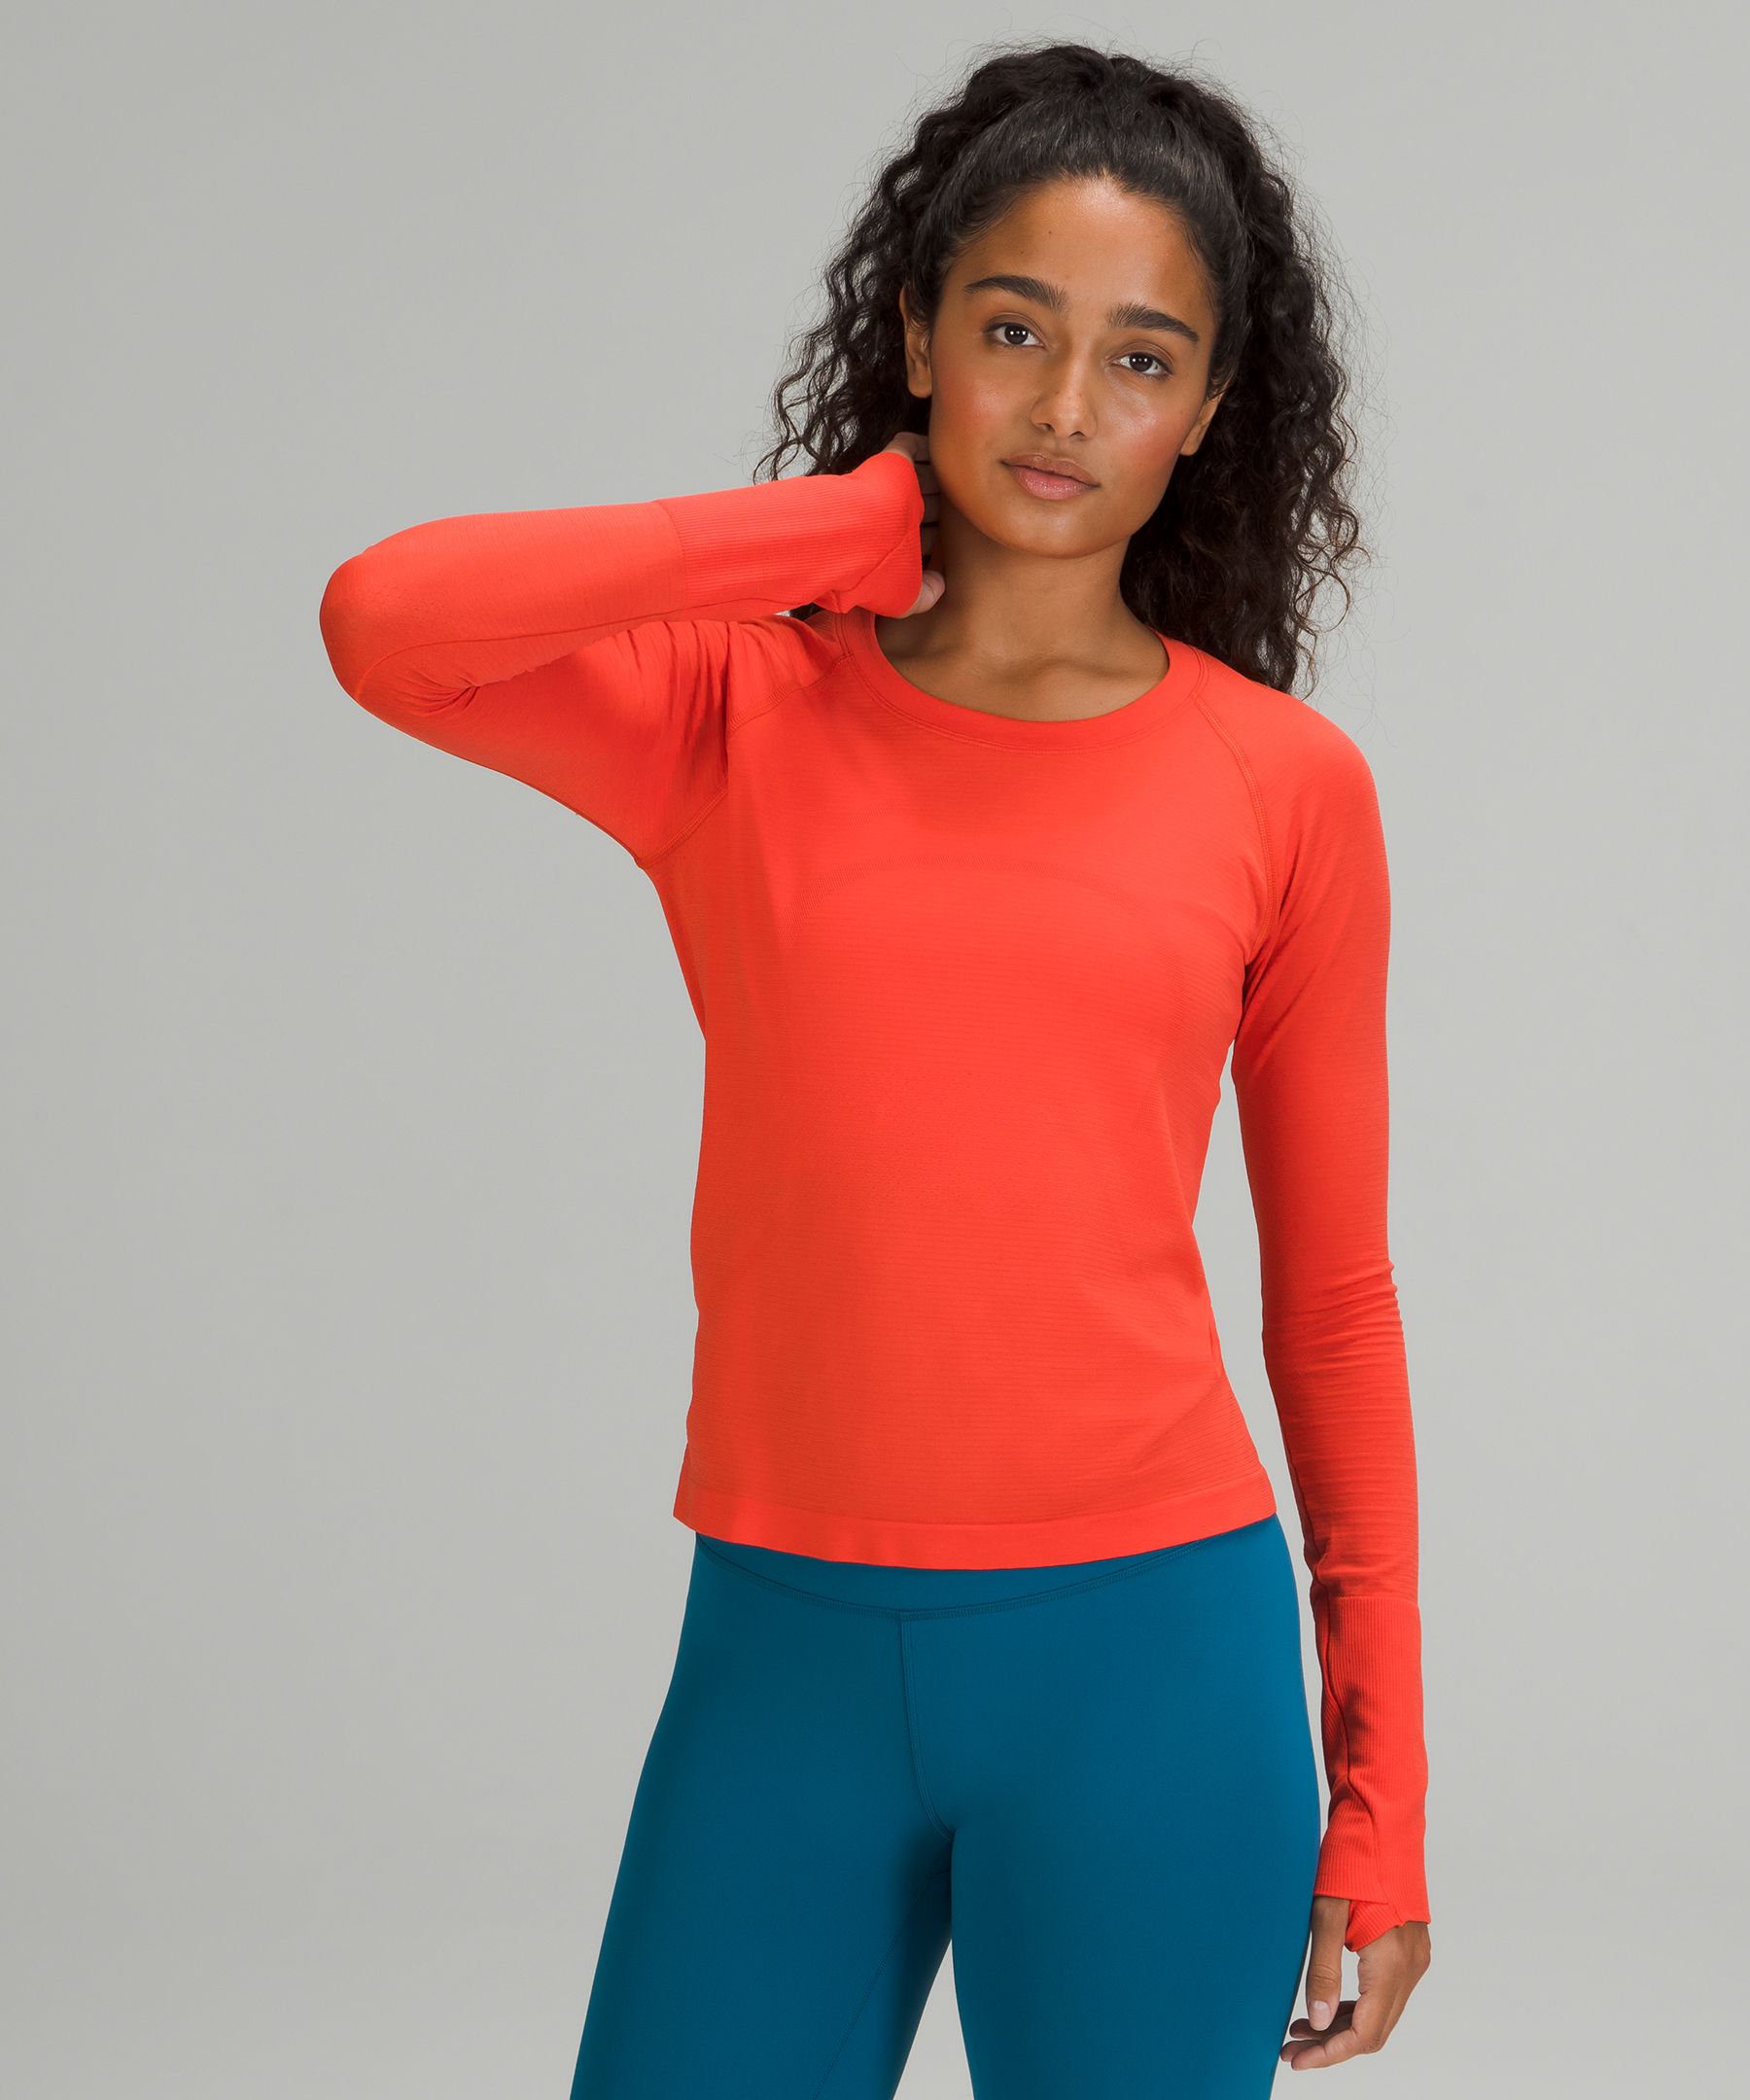 Lululemon Swiftly Tech Long Sleeve Shirt 2.0 Race Length In Autumn Red/autumn Red